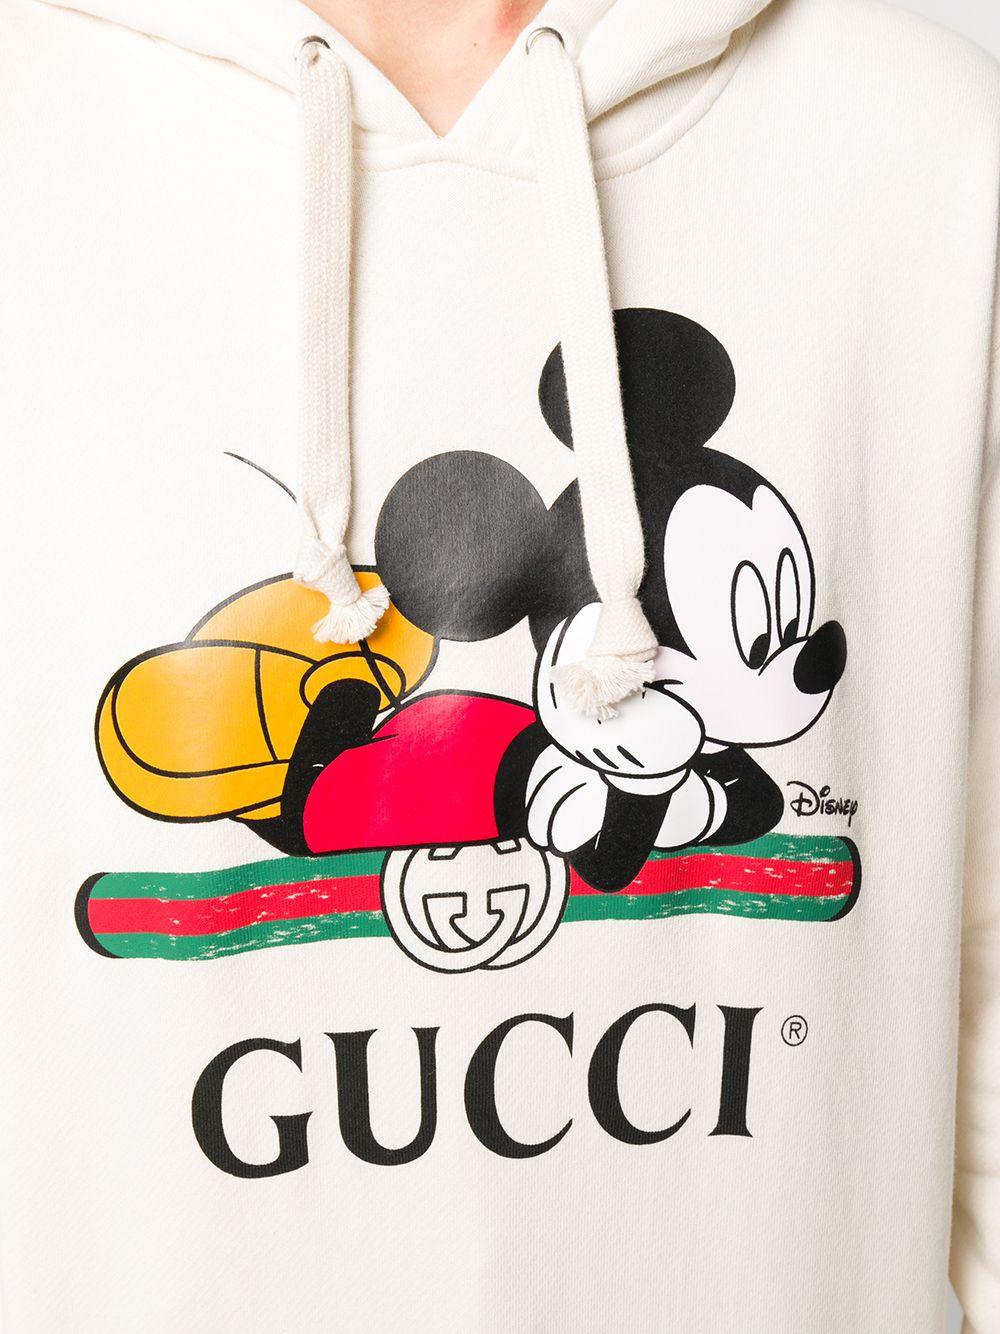 Get gucci mickey mouse hoodie For Free Shipping • Custom Xmas Gift